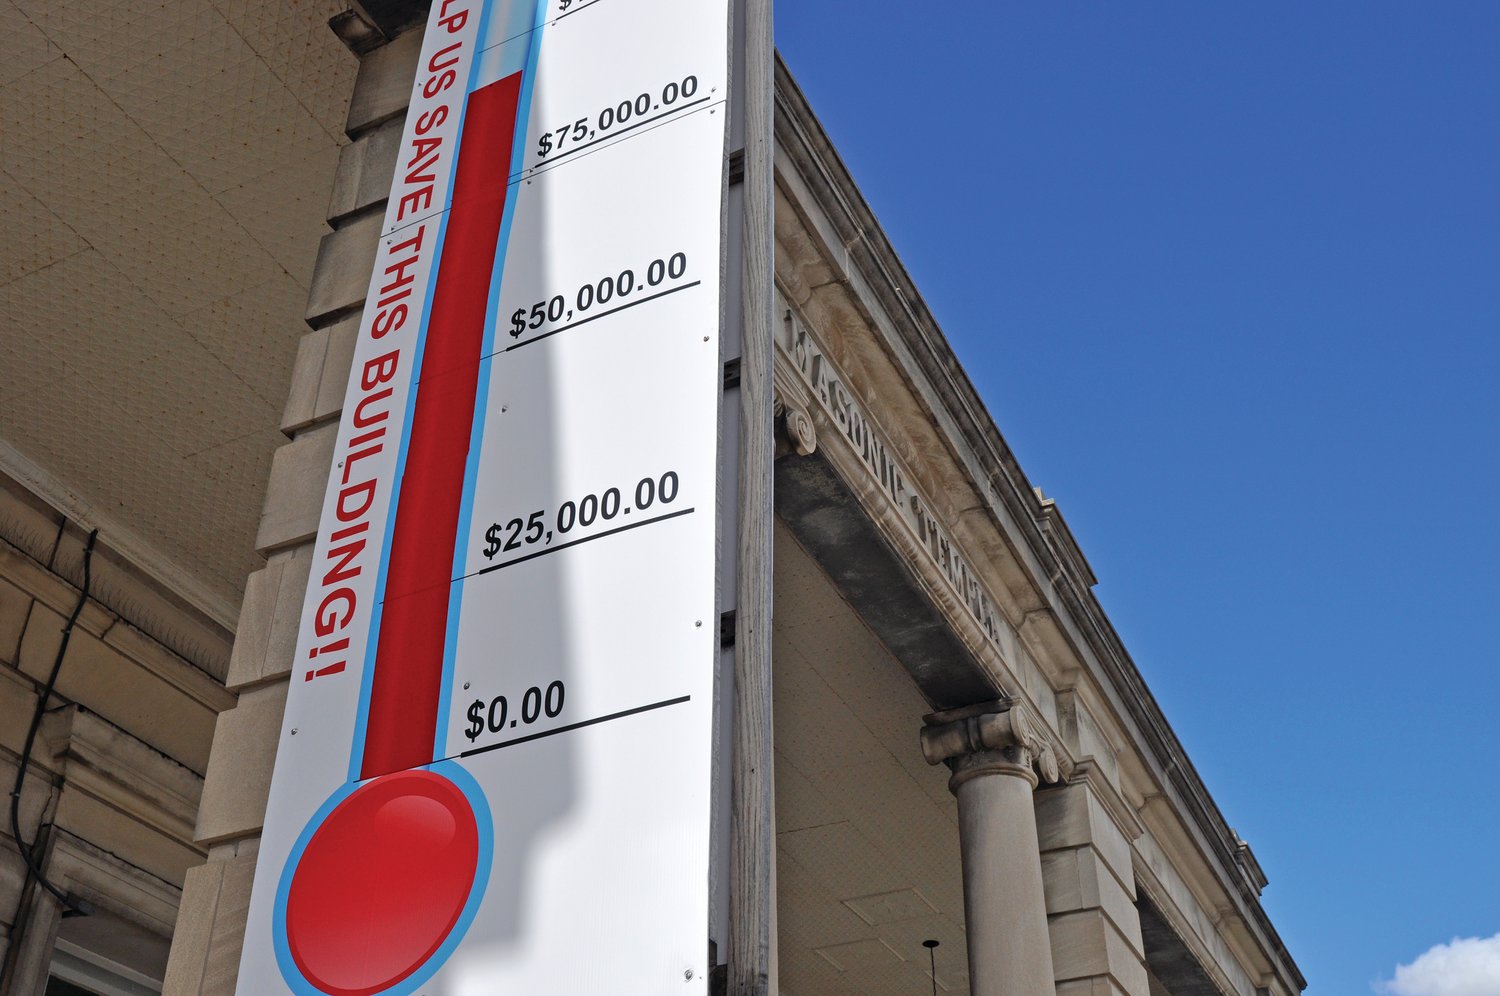 A thermometer tracks the fundraising progress at the Masonic Cornerstone Grand Hall and Event Center. The building is nearing local historic district status from the City of Crawfordsville.